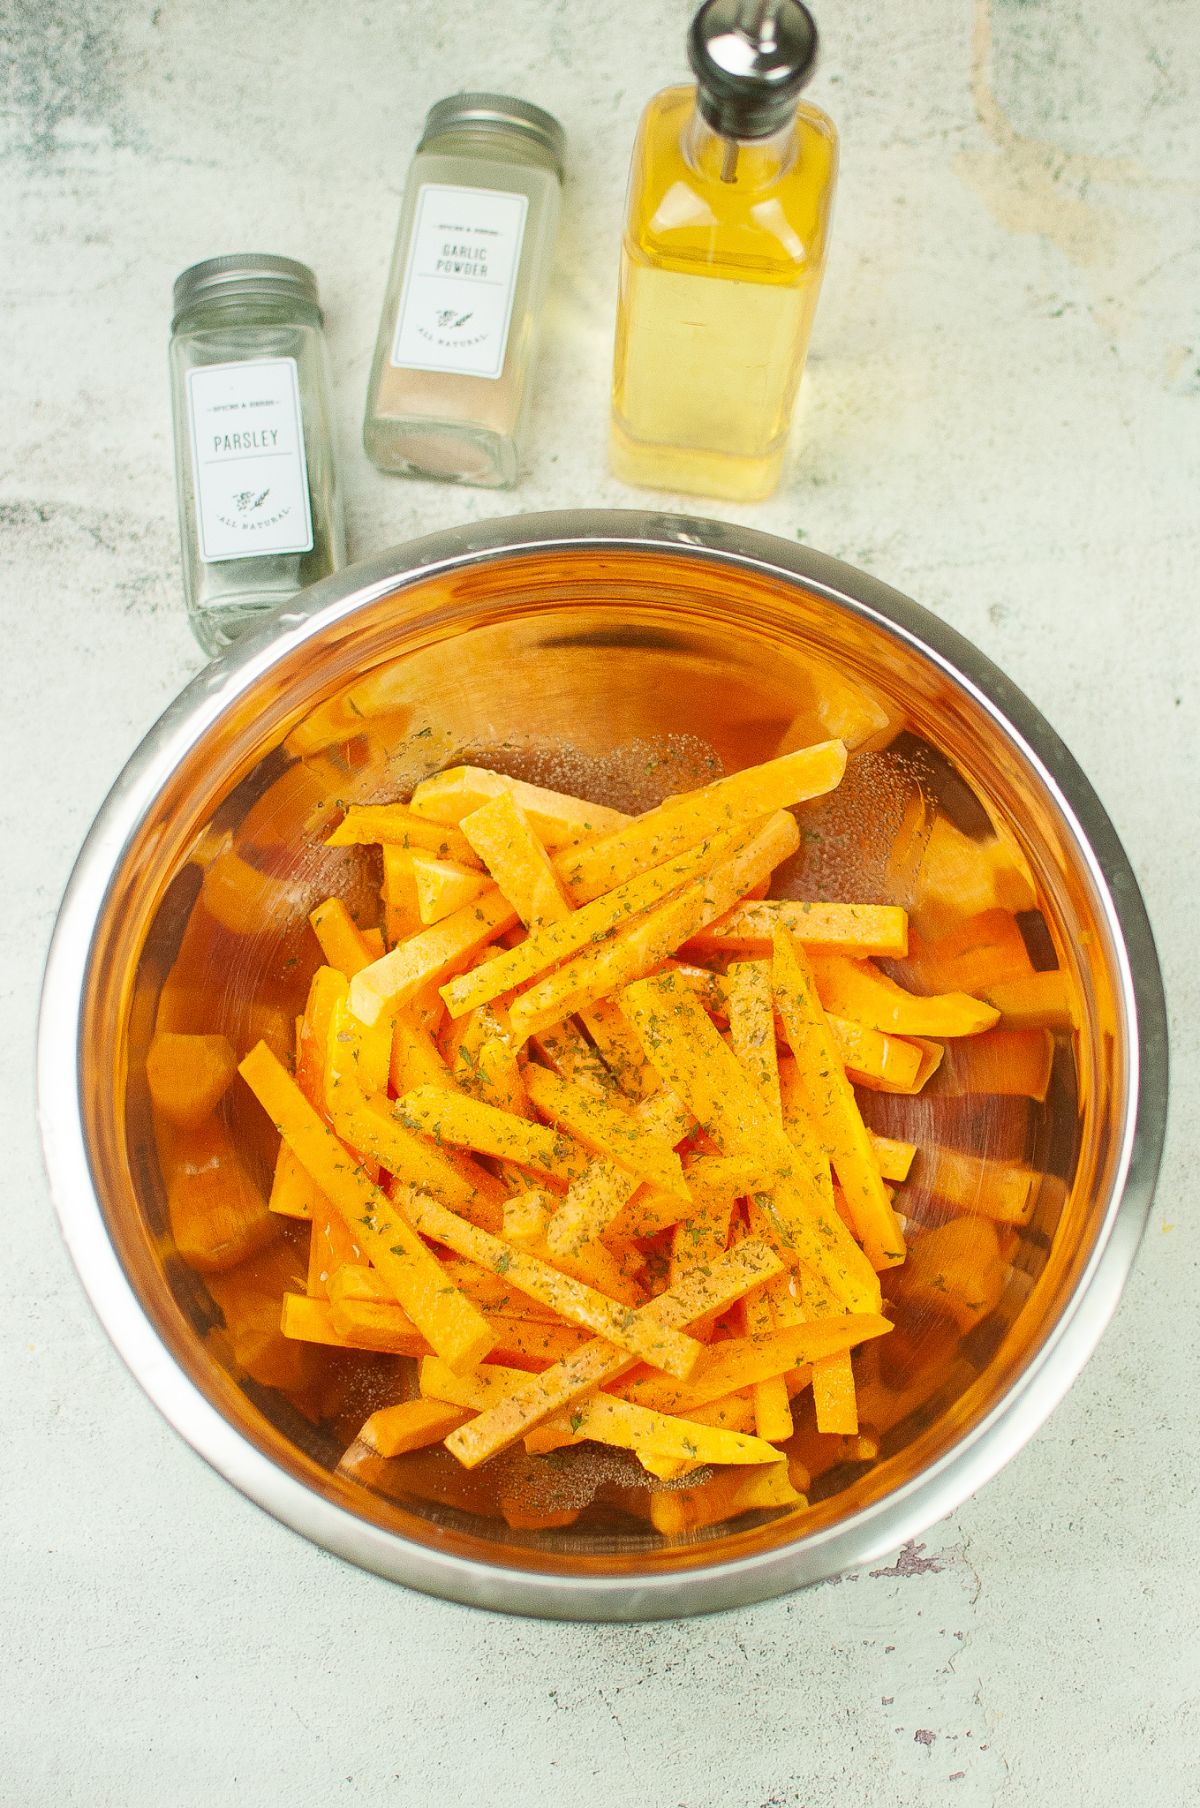 Squash fries in a mixing bowl, seasoned with garlic powder and parsley.